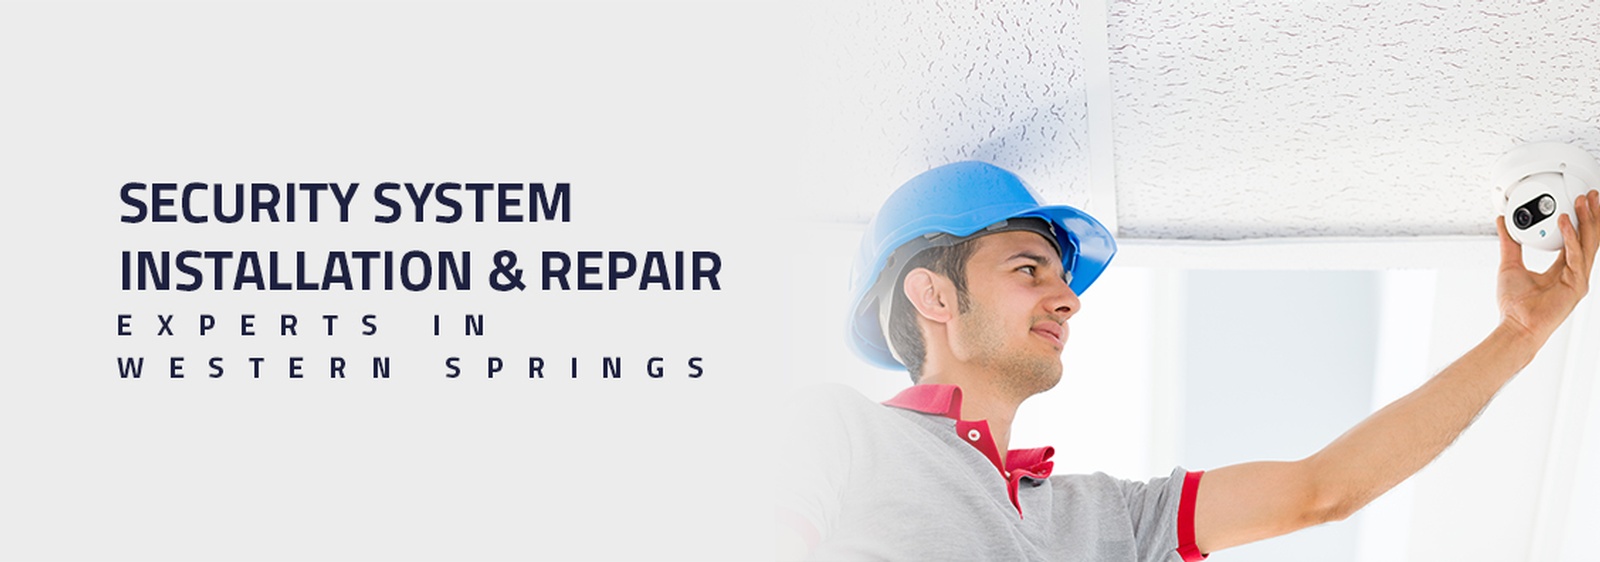 Security System Installation & Repair Experts in Western Springs